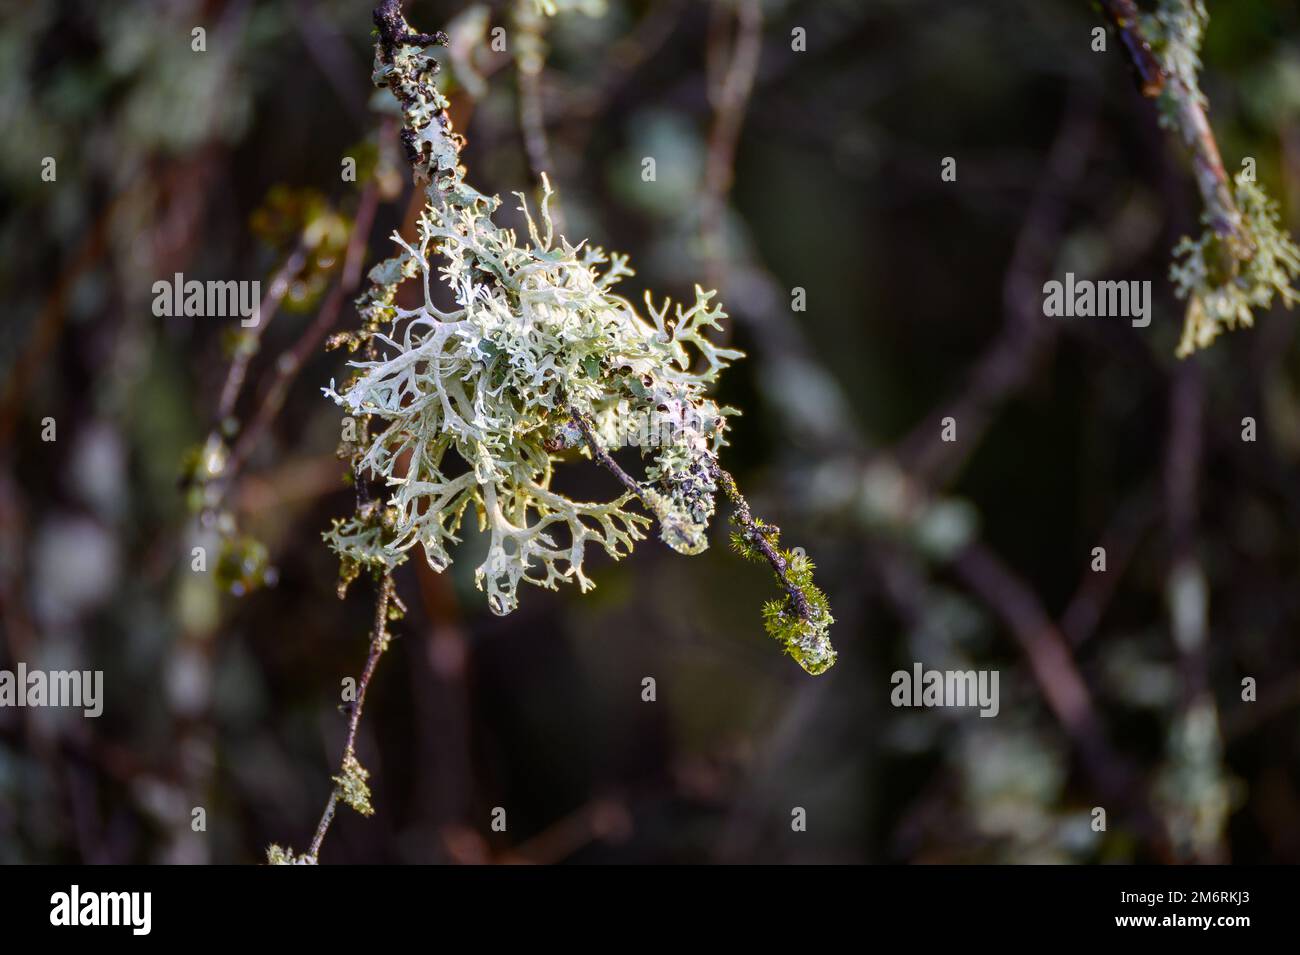 Close-up of lichen growing naturally on a branch along with moss and algae Stock Photo